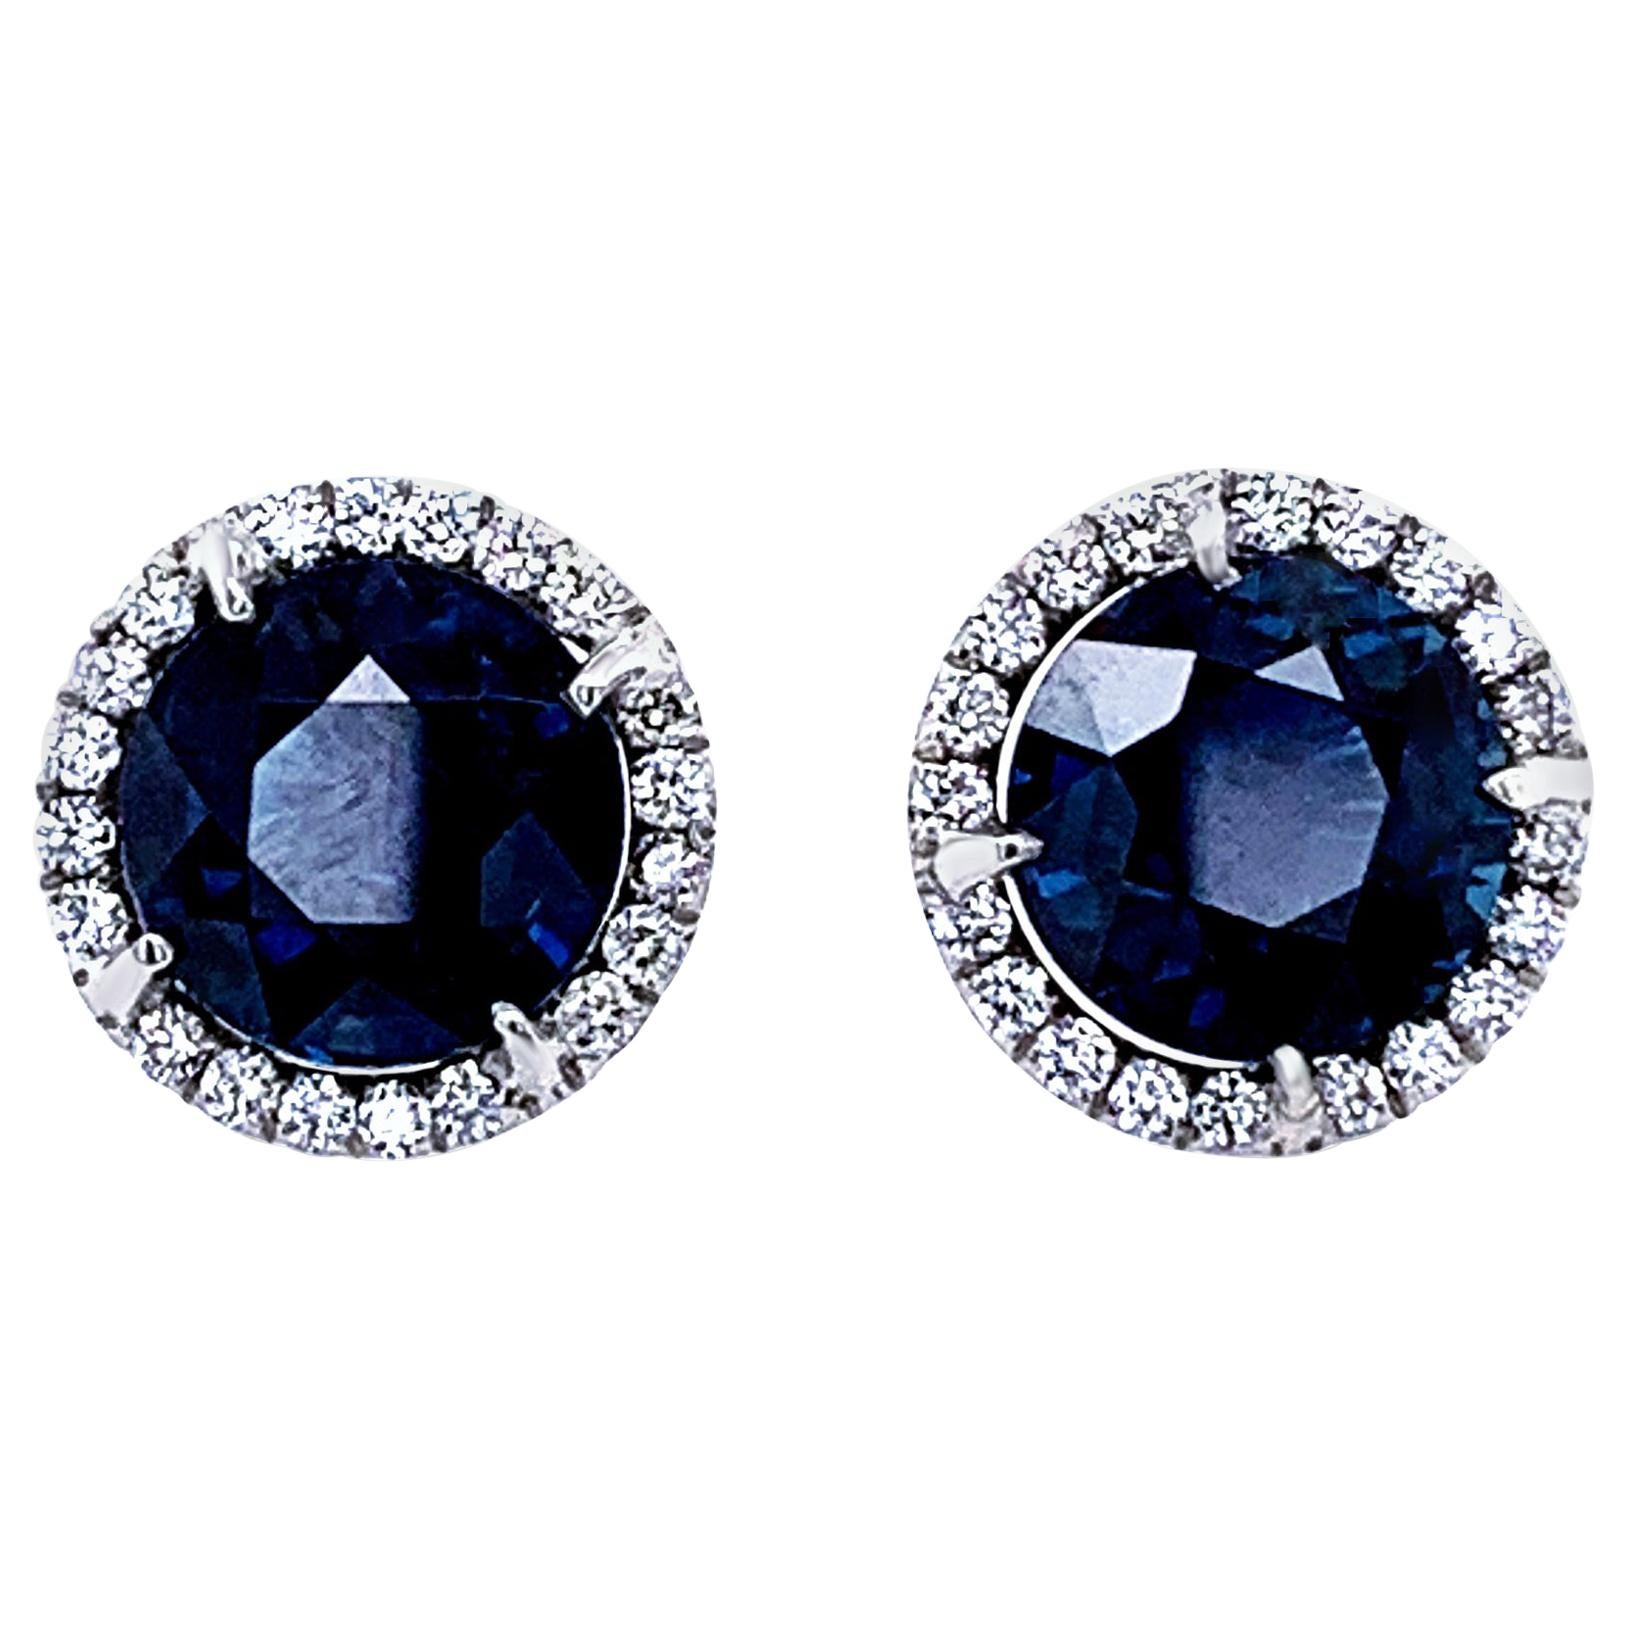 4.15 Carat 'Total Weight' Sapphire and Diamond Halo Stud Earrings For Sale